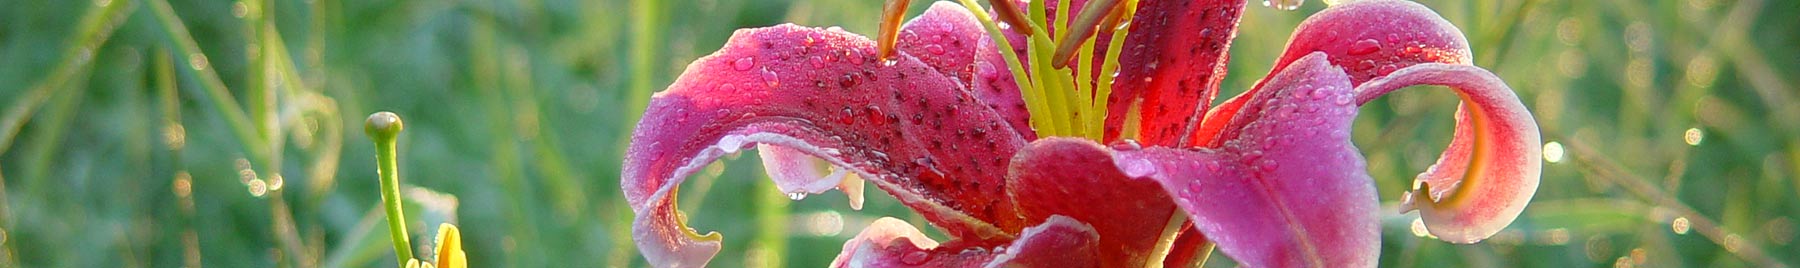 A pink tiger lily decorated with dewdrops in early morning light.